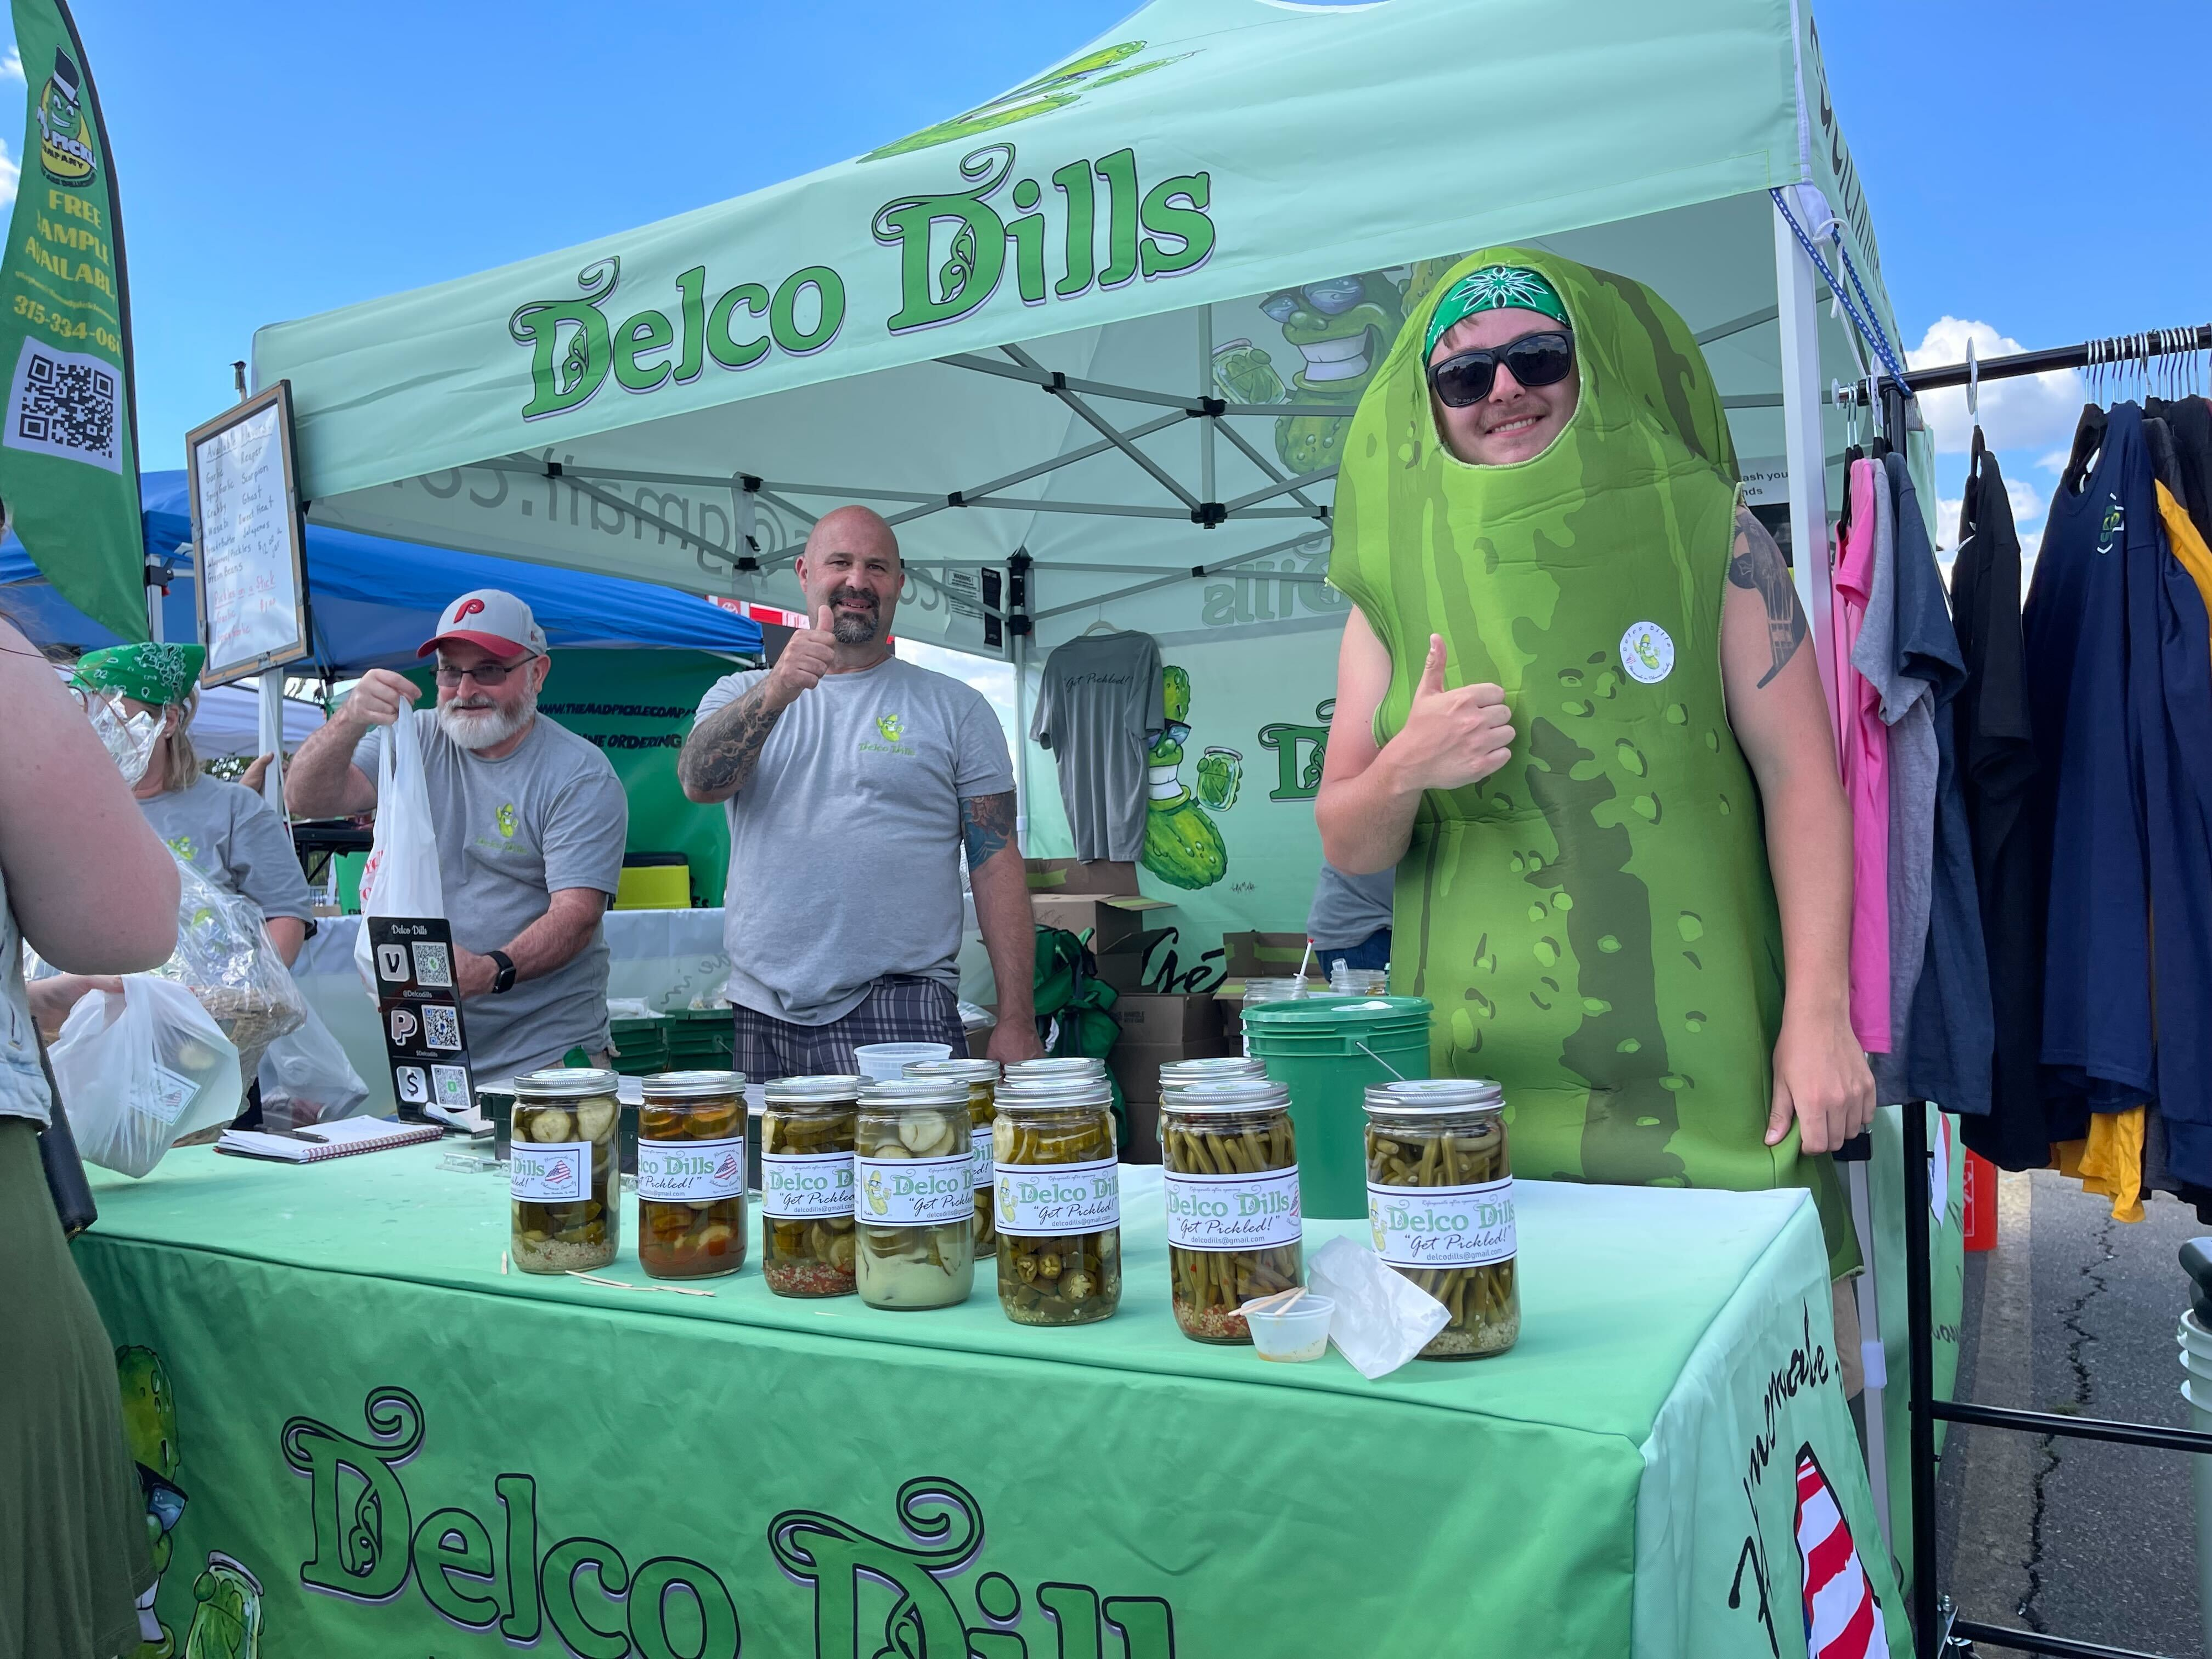 Pickle party a 'big dill' in South Philly, as thousands of people come out to relish sunshine and brine